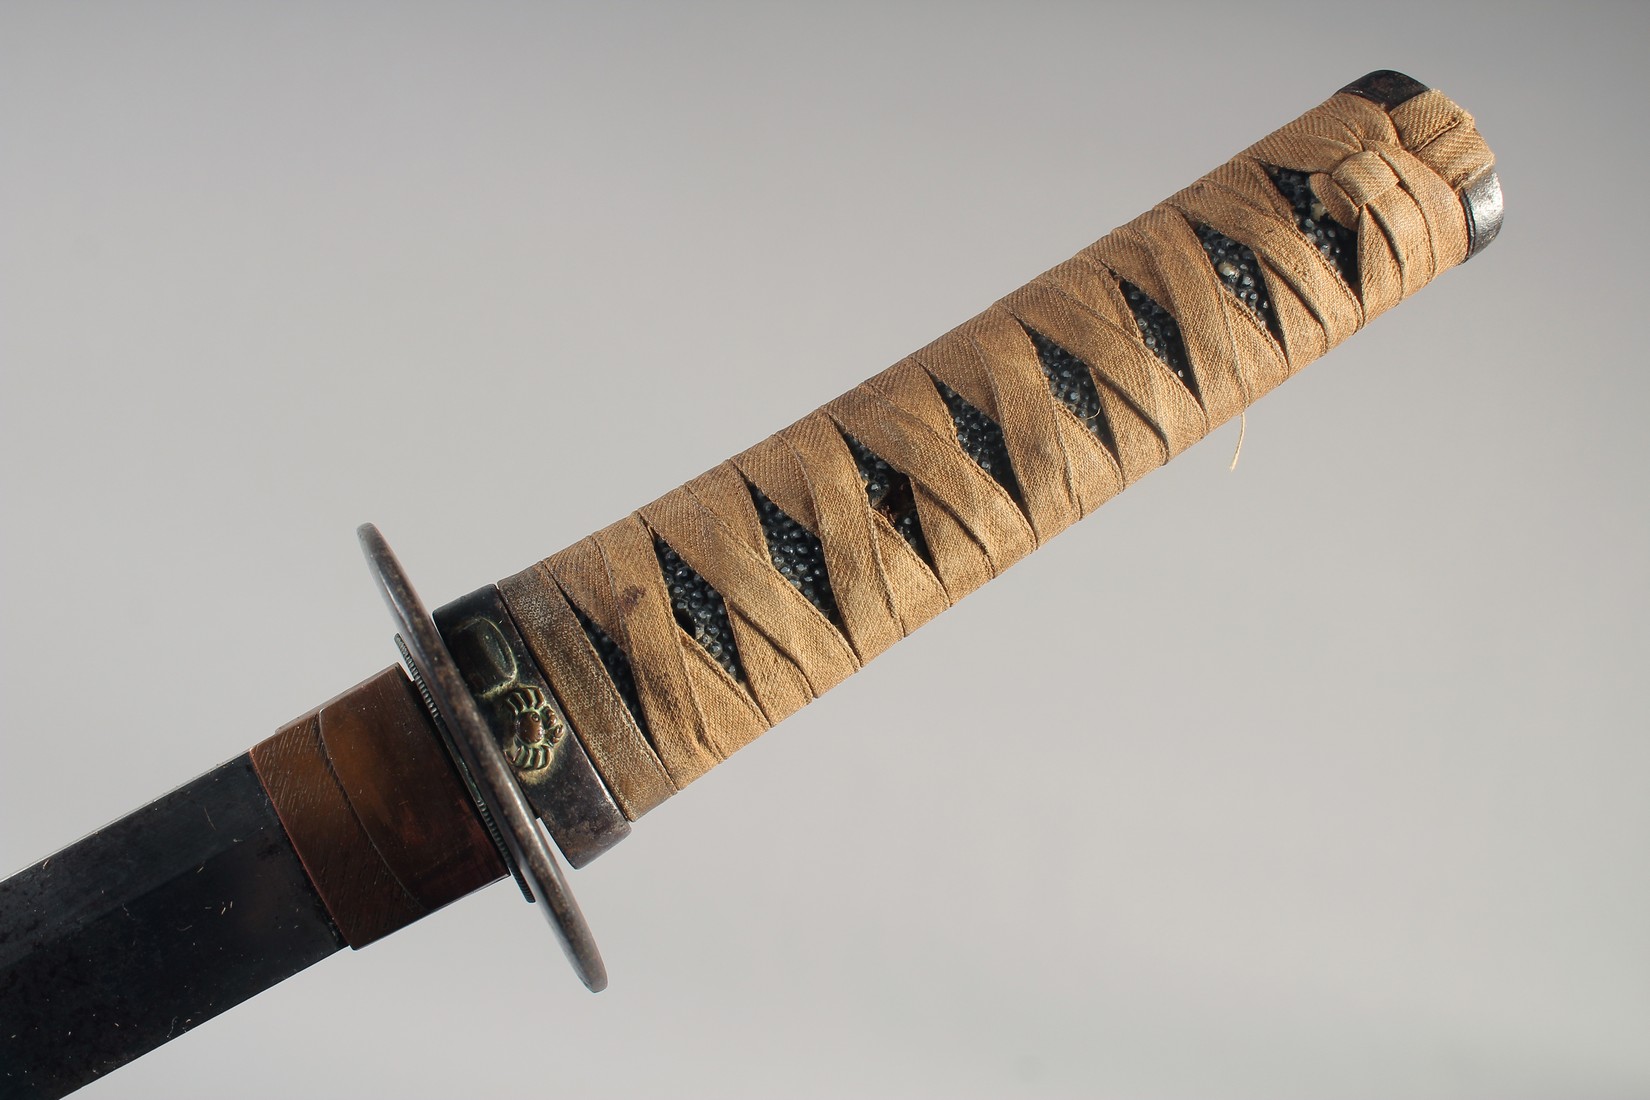 A LATE 19TH - EARLY 20TH CENTURY APANESE WAKIZASHI, with cord bound grip, gold inlaid steel tsuba in - Image 2 of 5